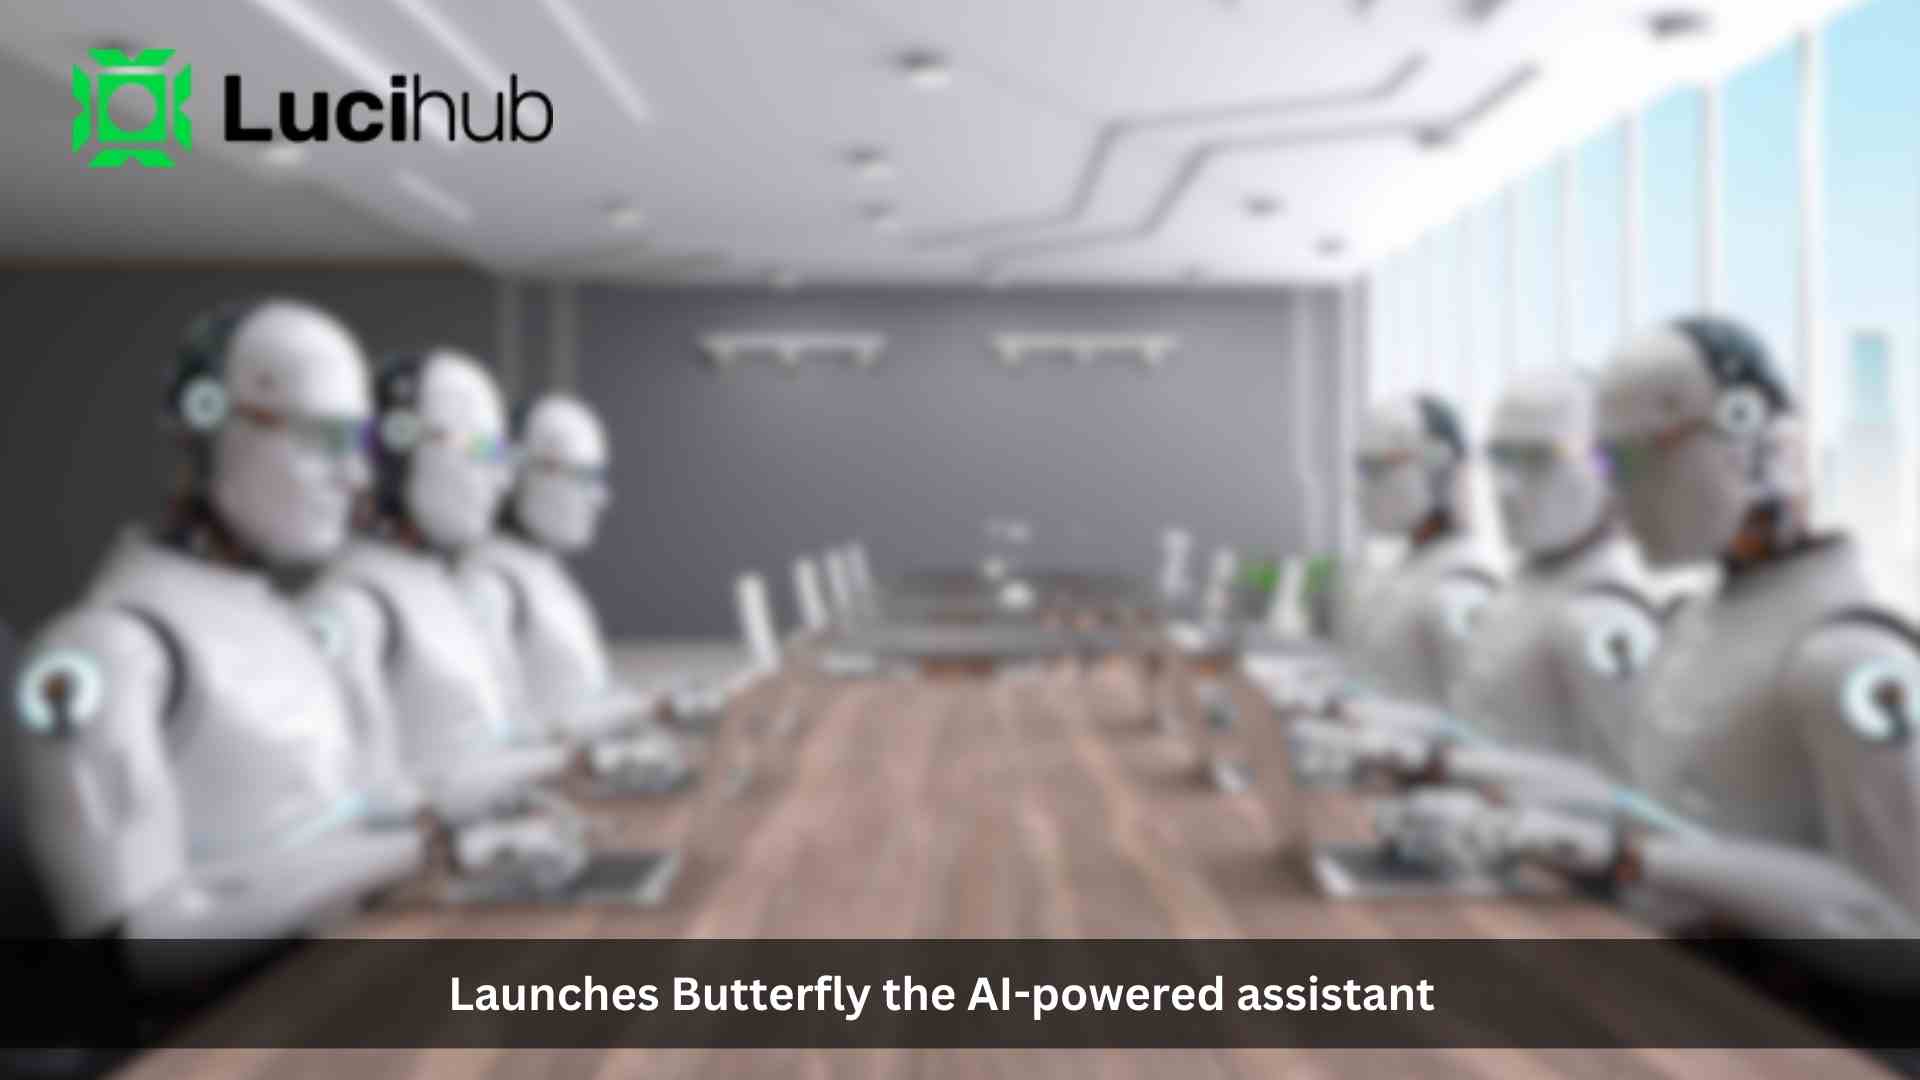 Introducing Lucihub Butterfly: The AI-Powered Assistant Creative Director Accelerating Video Production